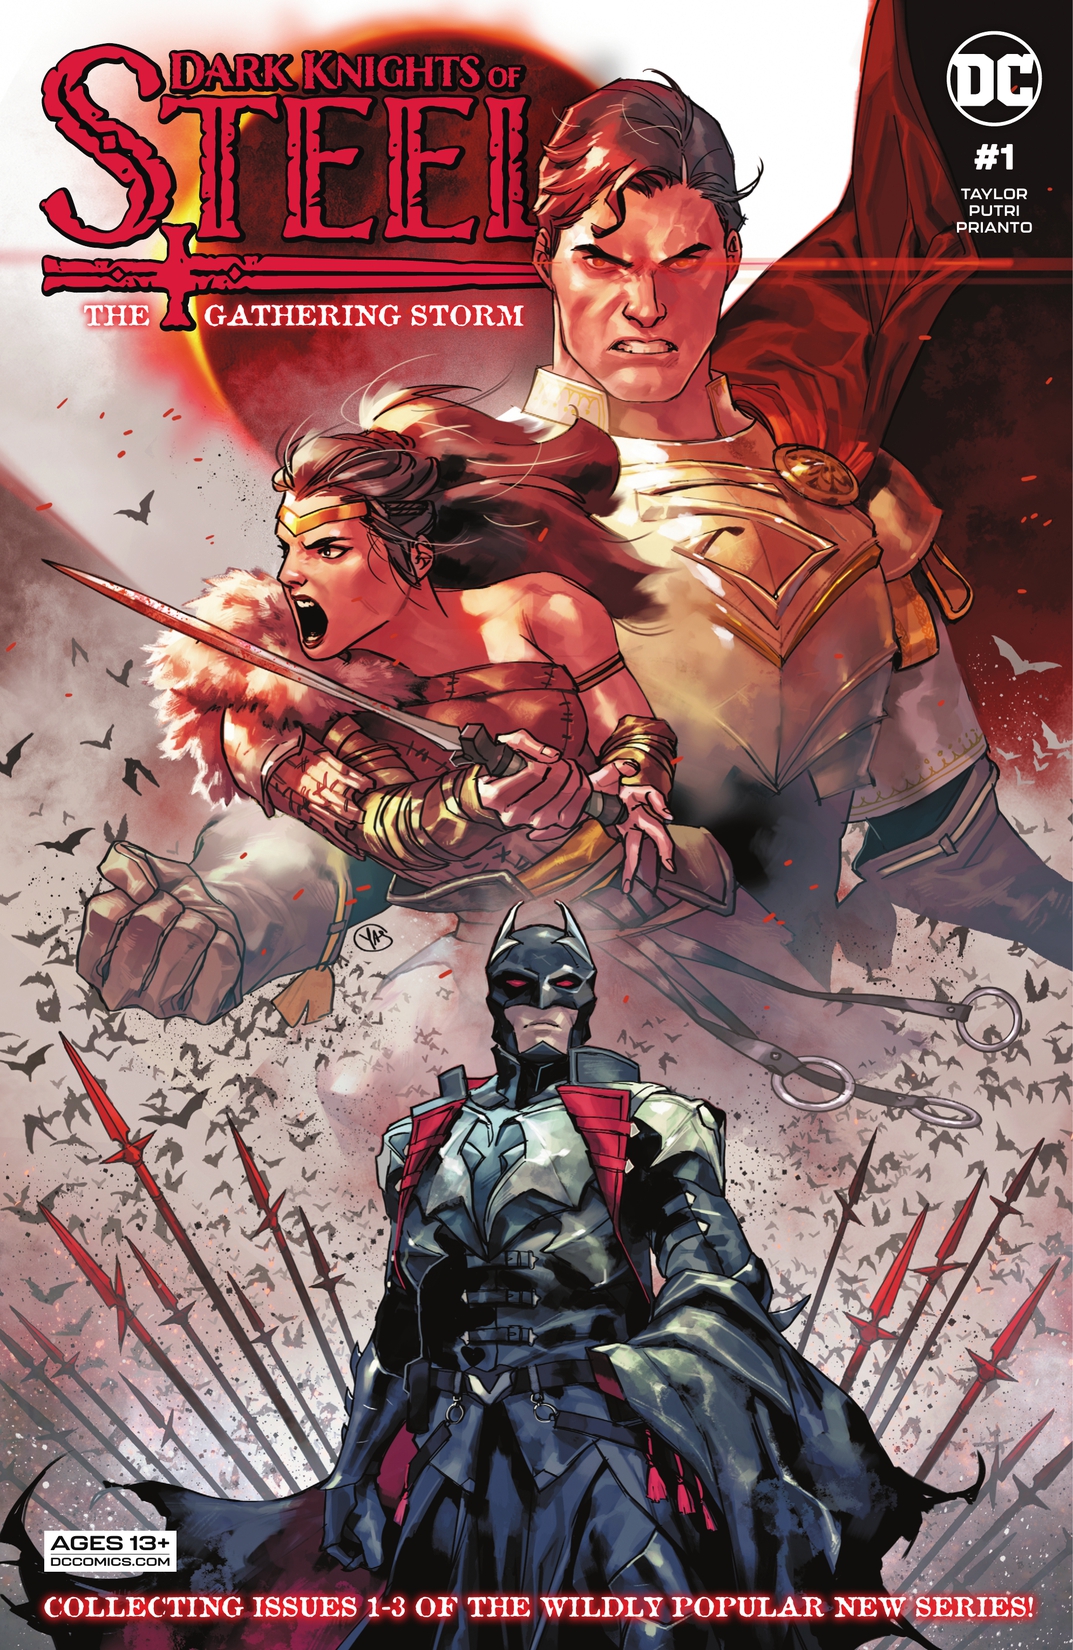 Dark Knights of Steel: The Gathering Storm #1 preview images